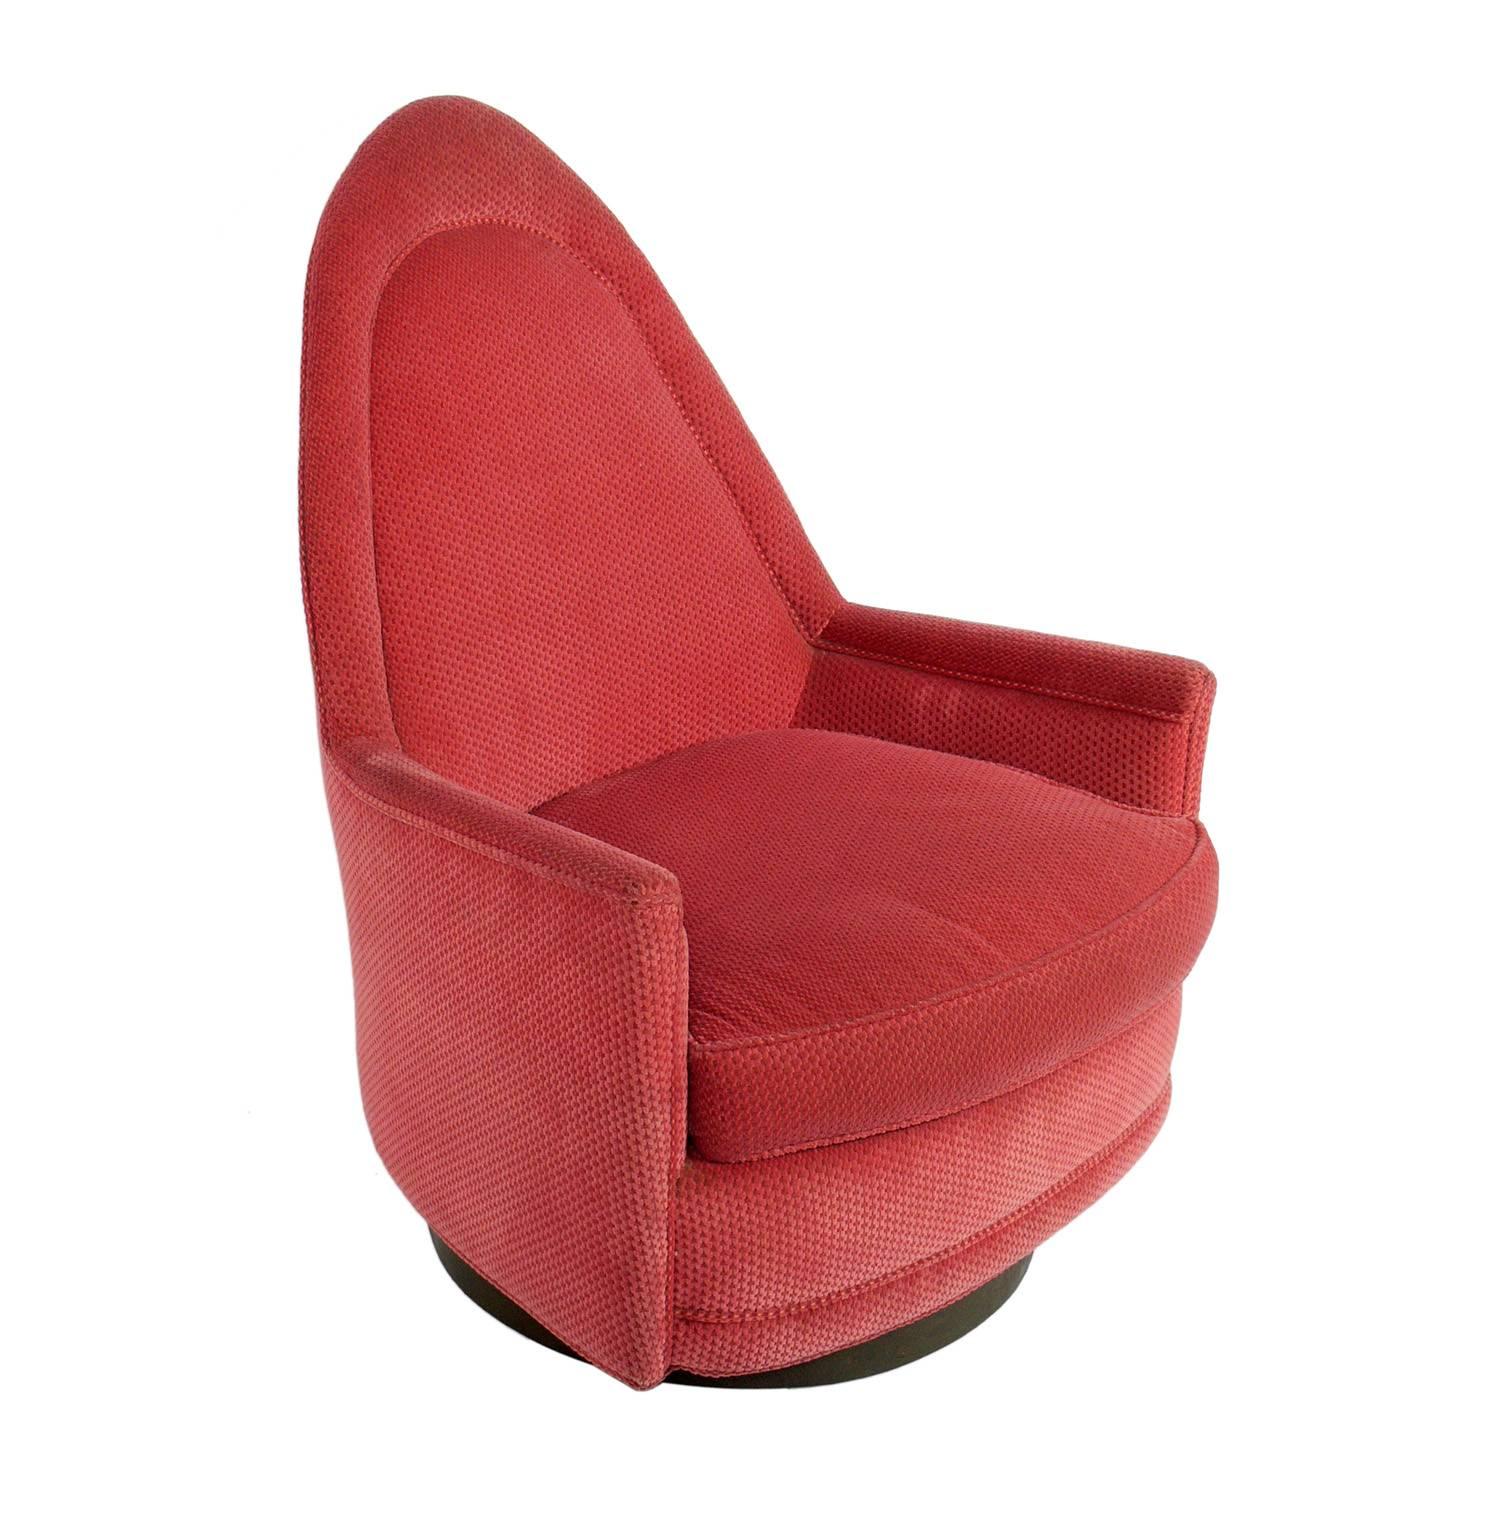 Curvaceous swivel chair, designed by Milo Baughman for Thayer Coggin, American, circa 1960s. This chair is currently being reupholstered and refinished and can be completed in your choice of finish color and reupholstered in your fabric. The price